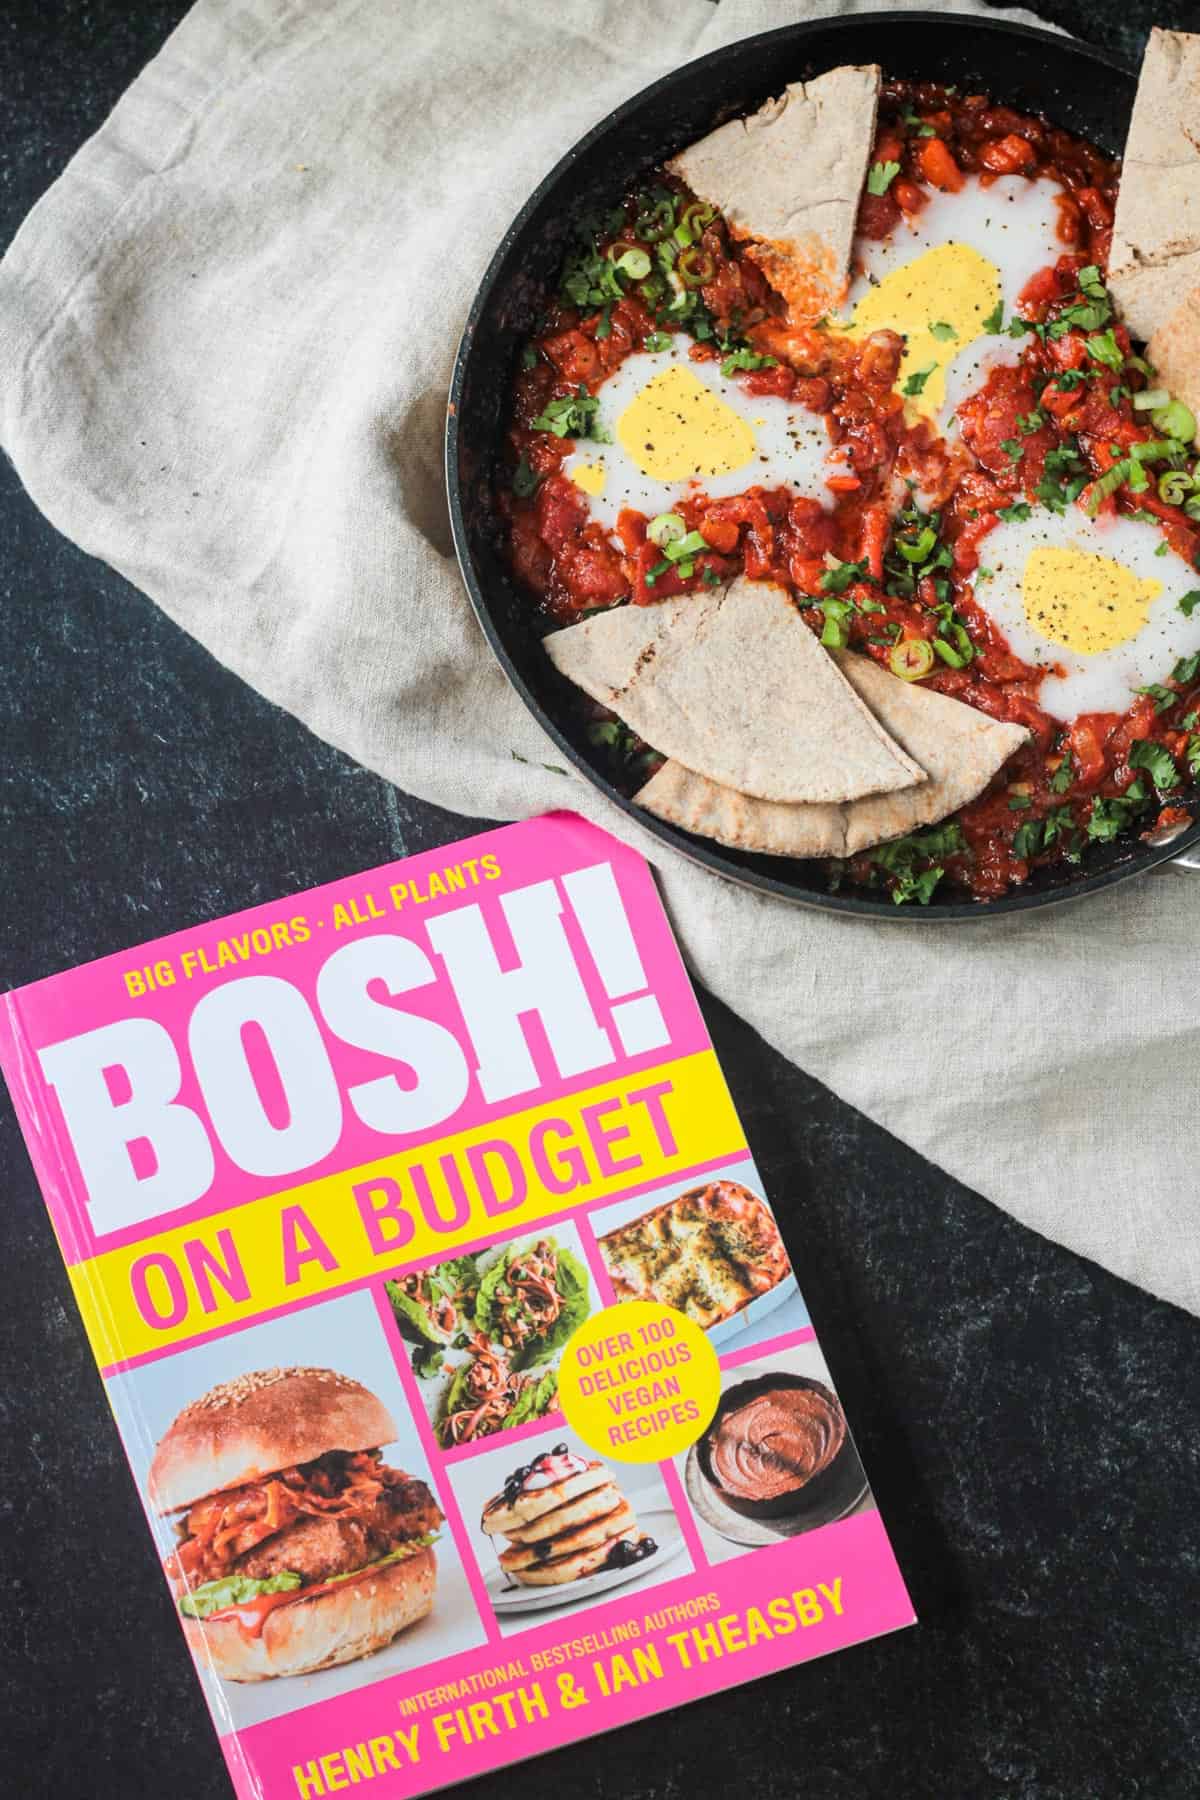 Finished dish next to the Bosh on a Budget cookbook.